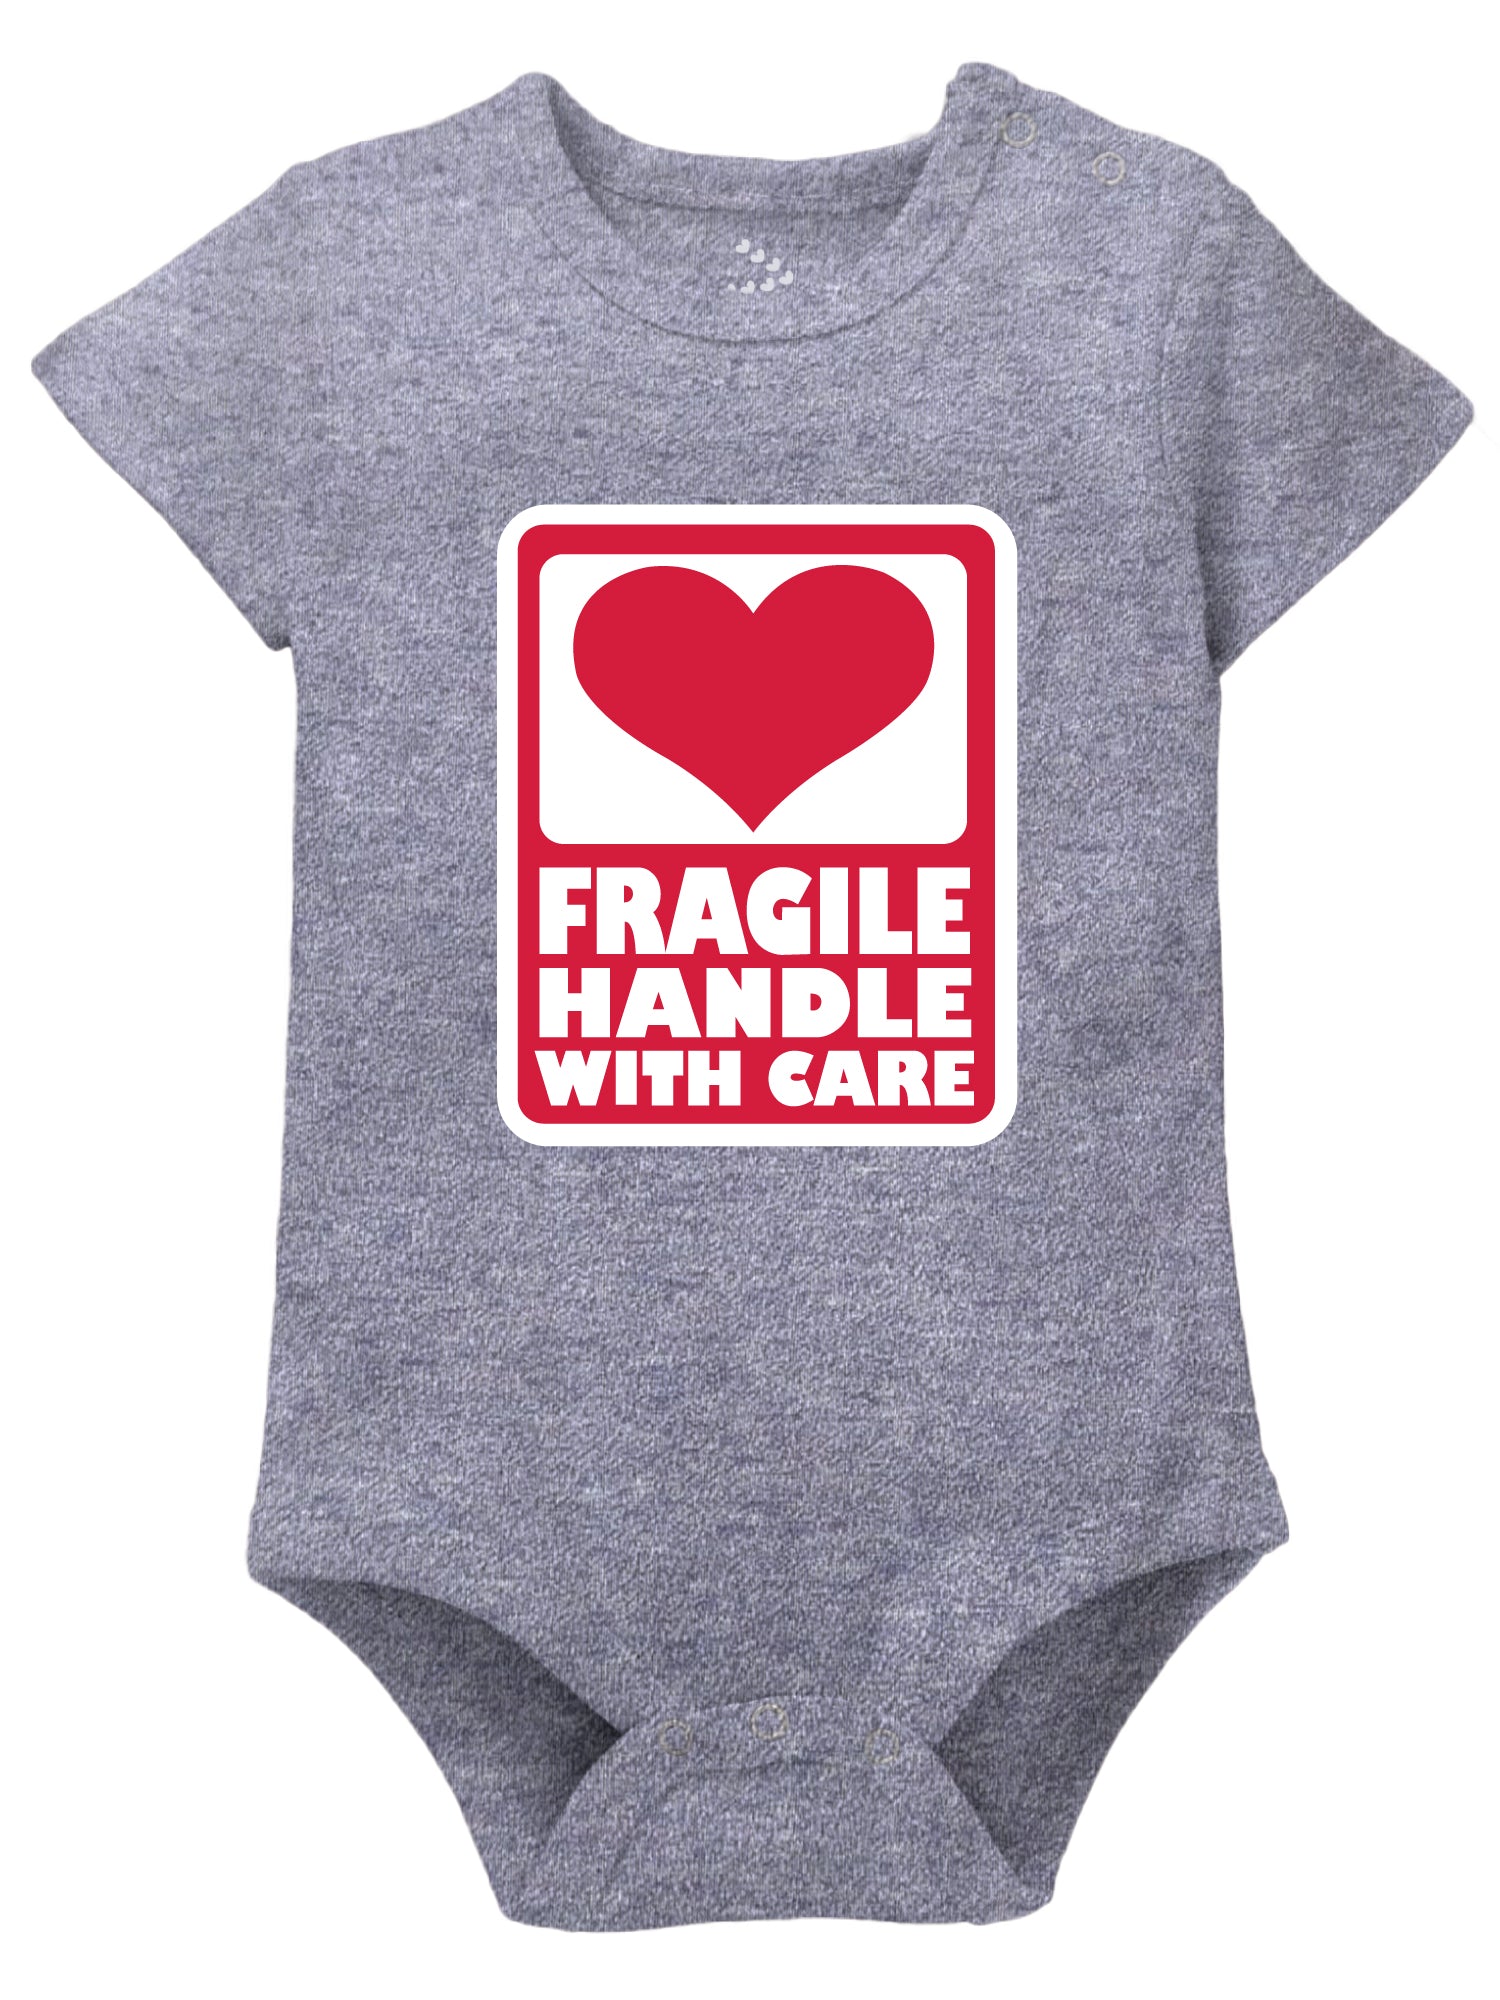 Fragile Handle with Care - Onesie